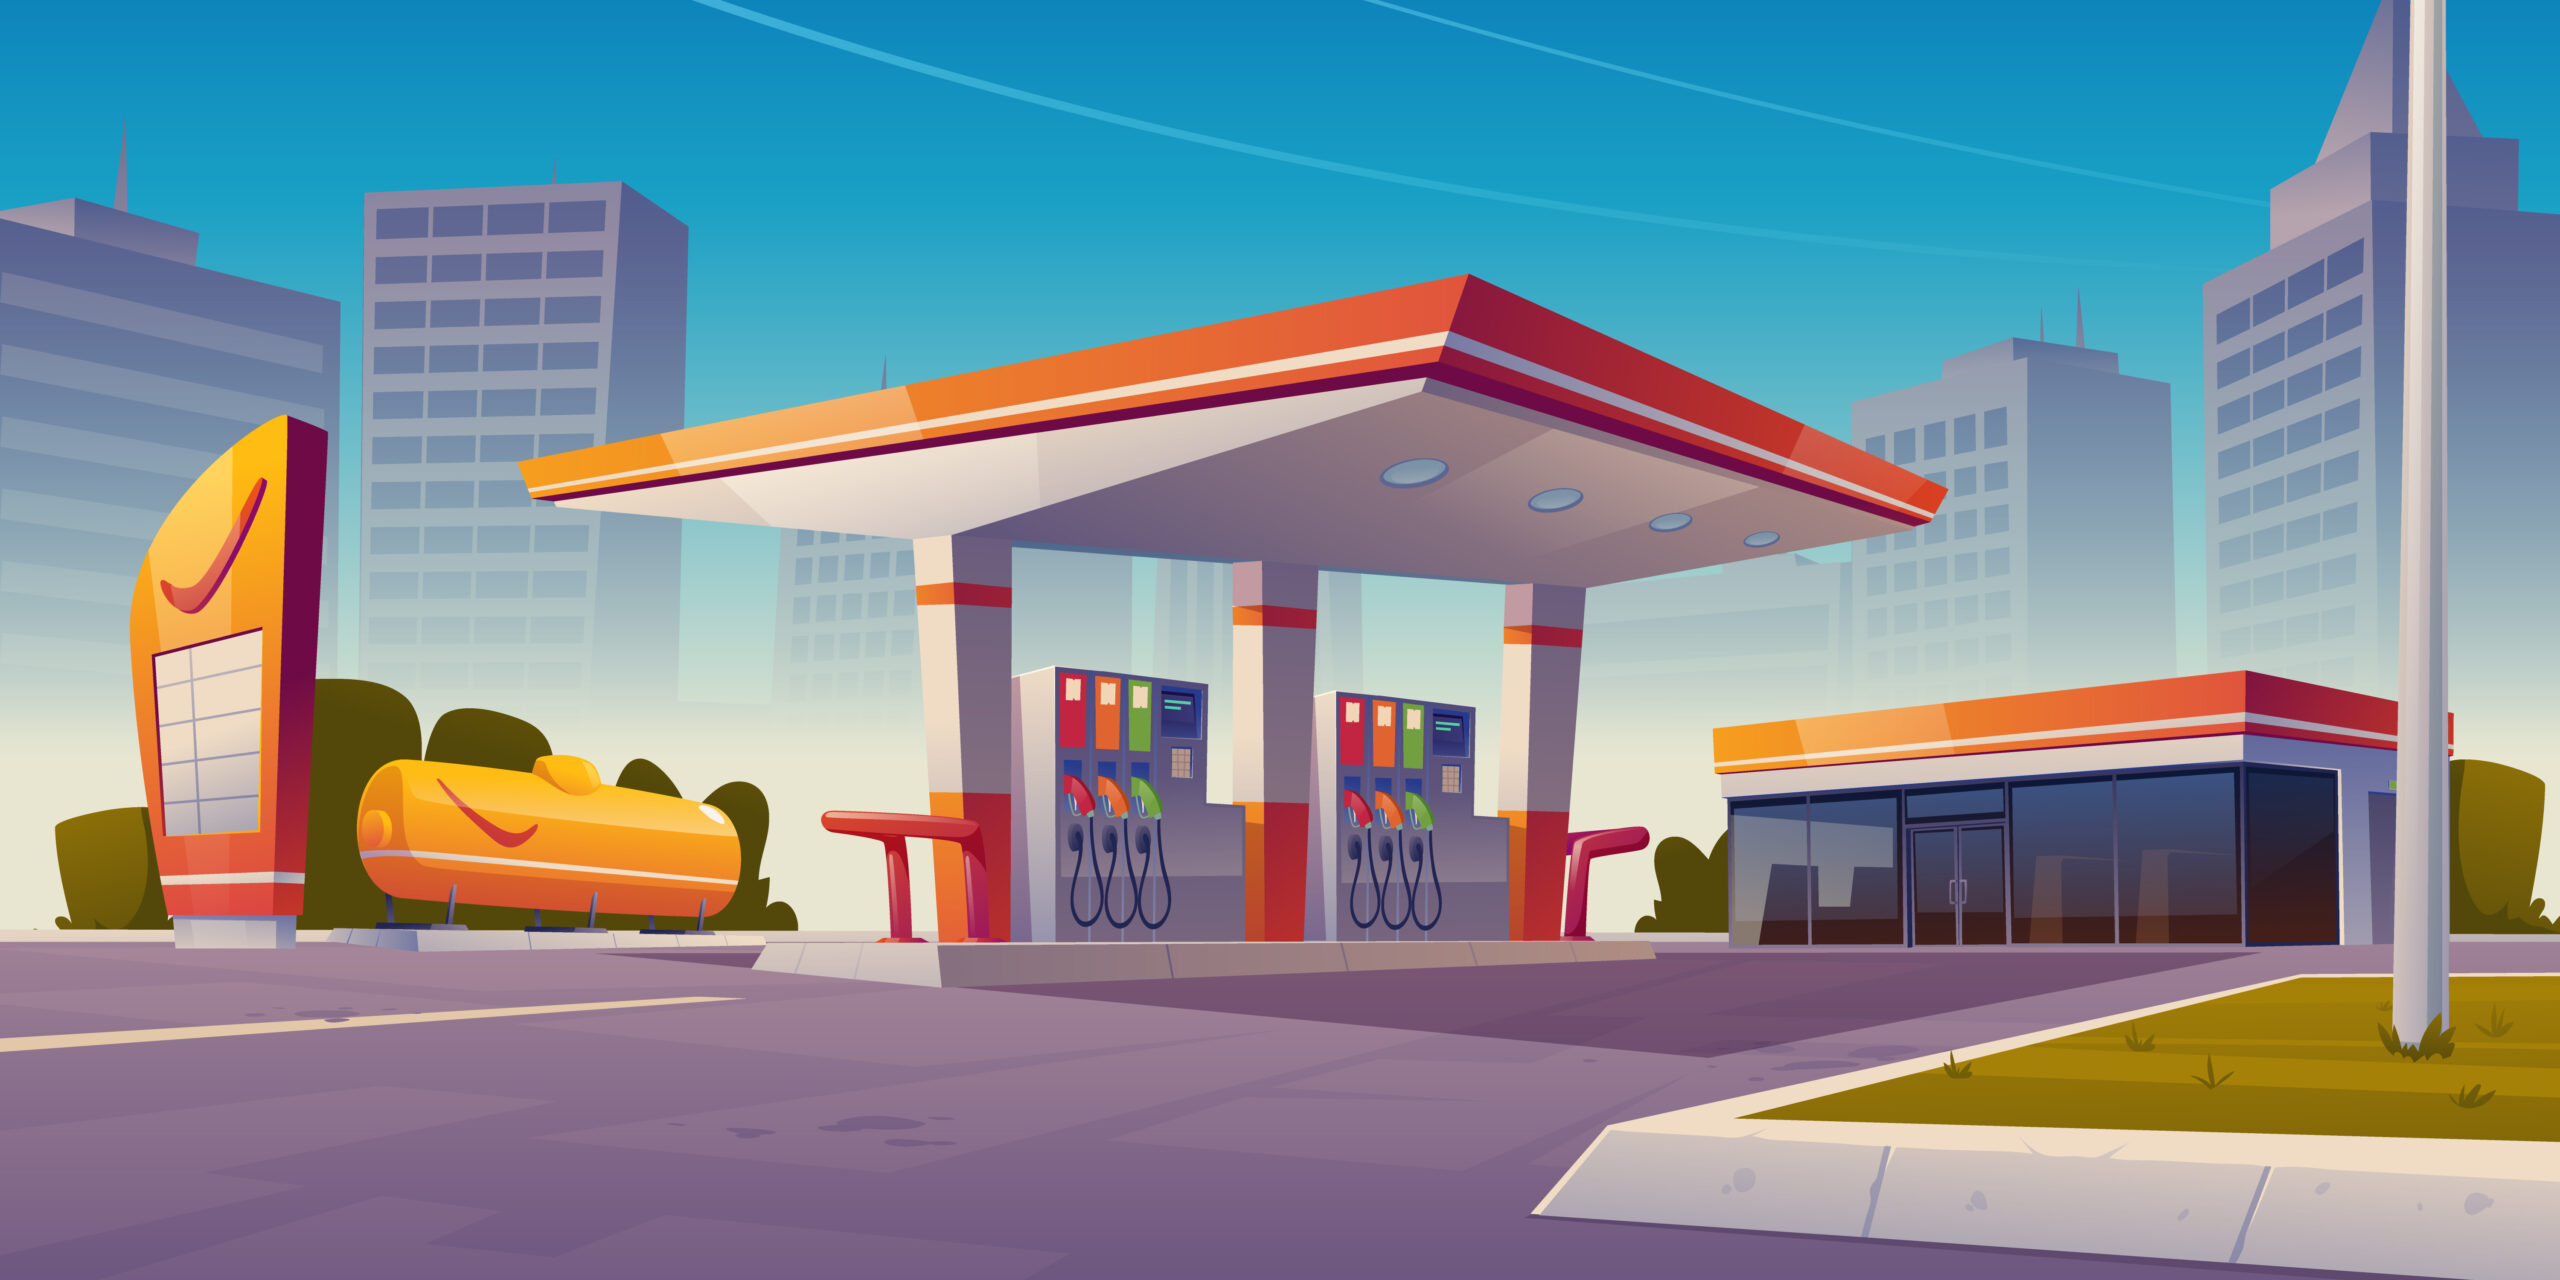 Challenges for Fuel Station Owners